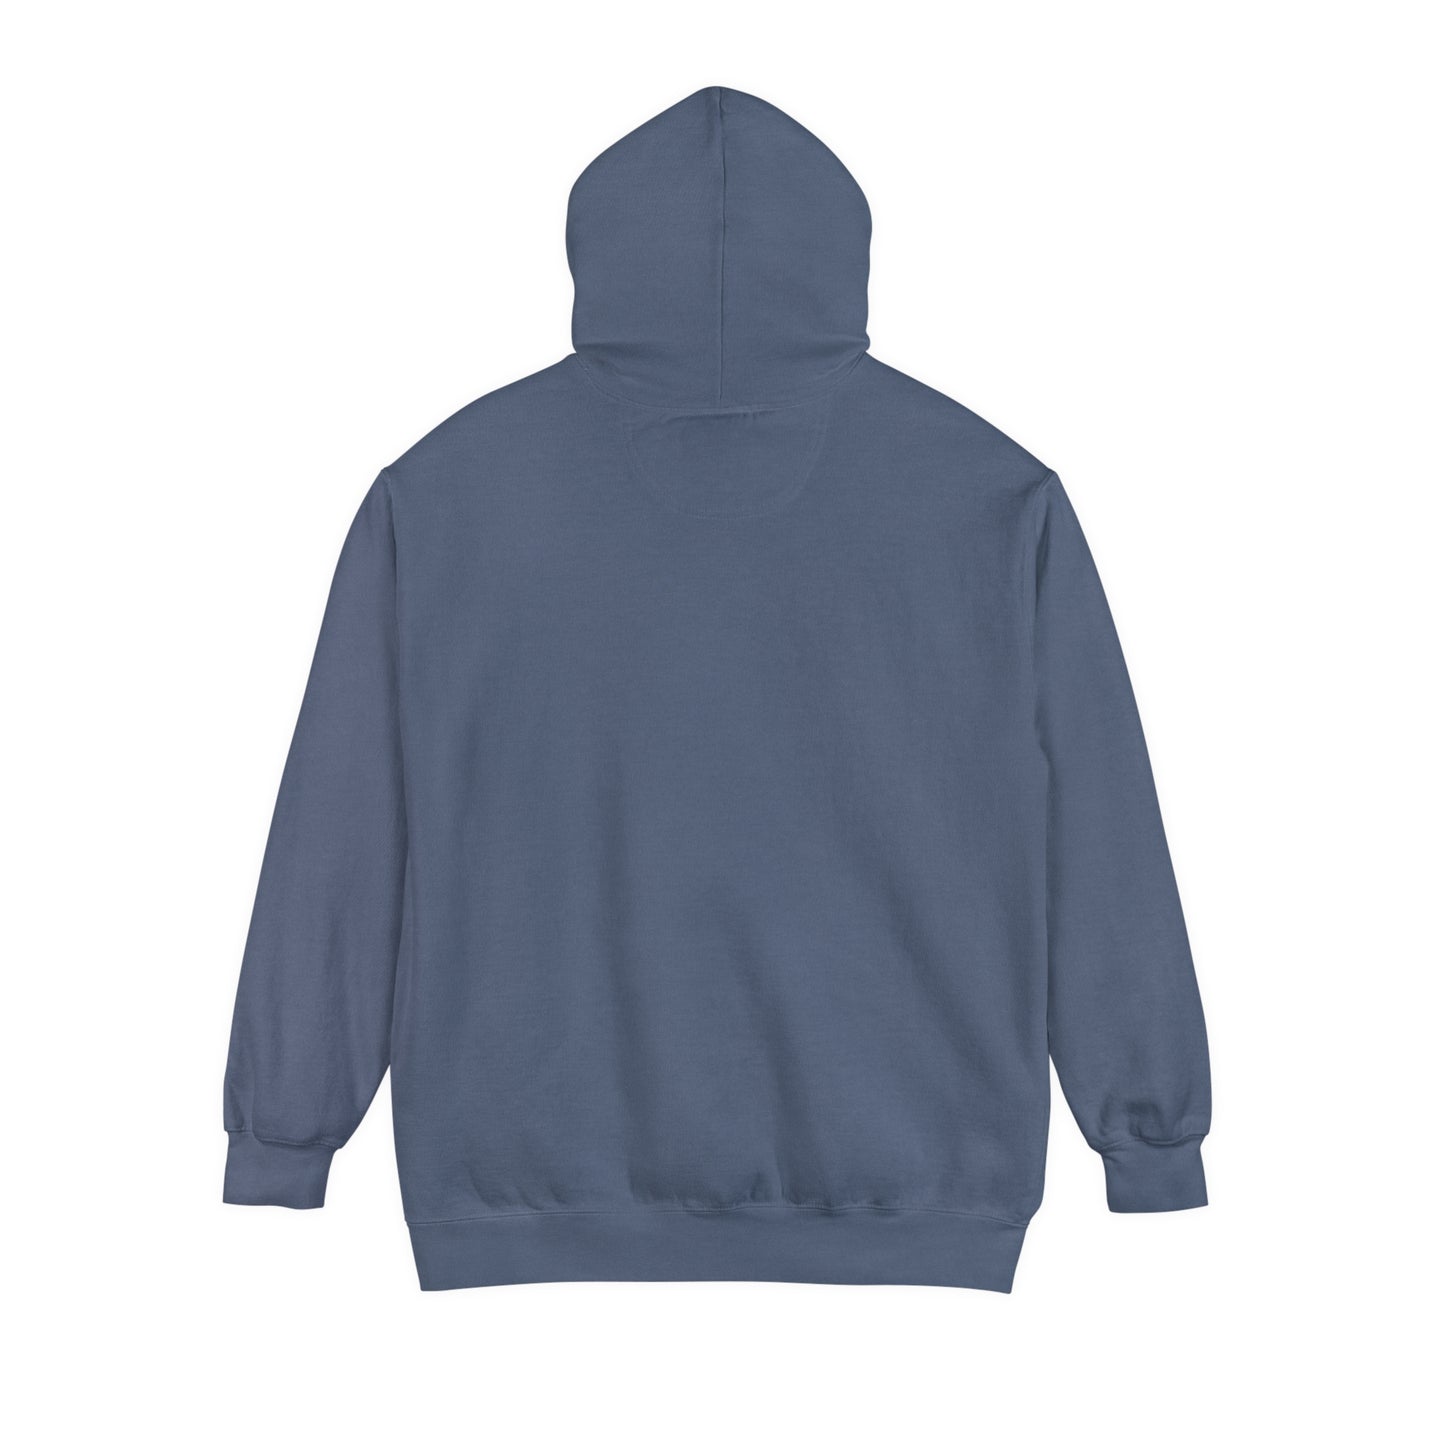 Nothing Changes, v2 Unisex Garment-Dyed Hoodie